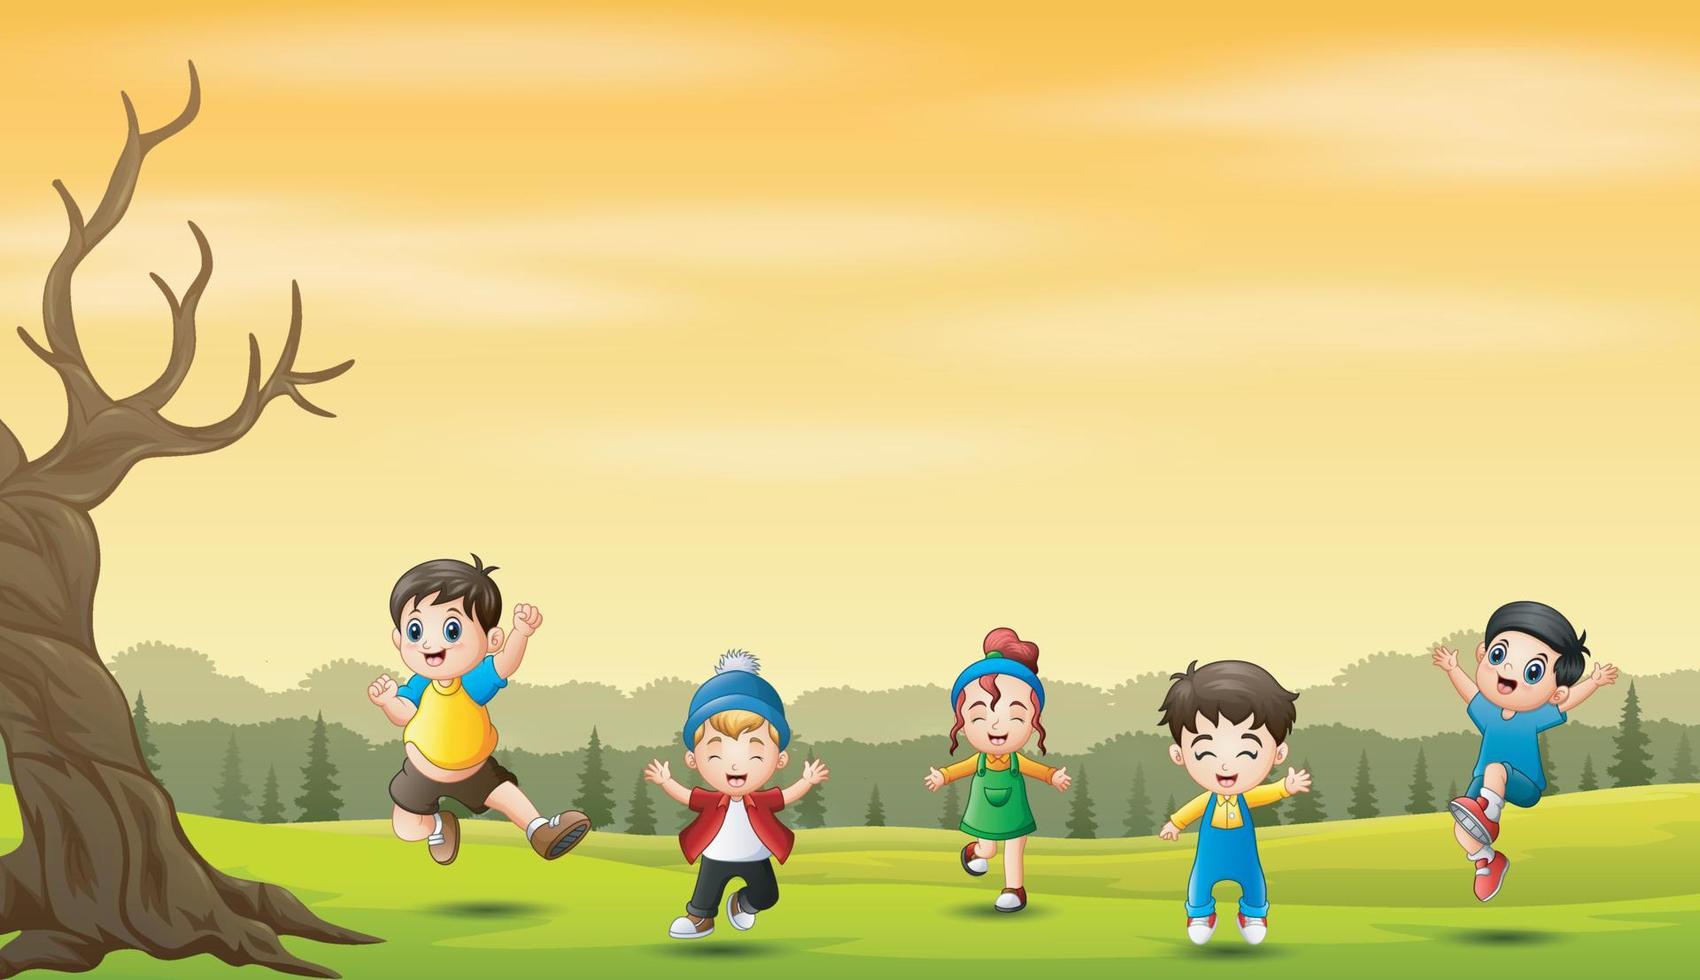 Cheerful little kids jumping and laughing in nature background vector